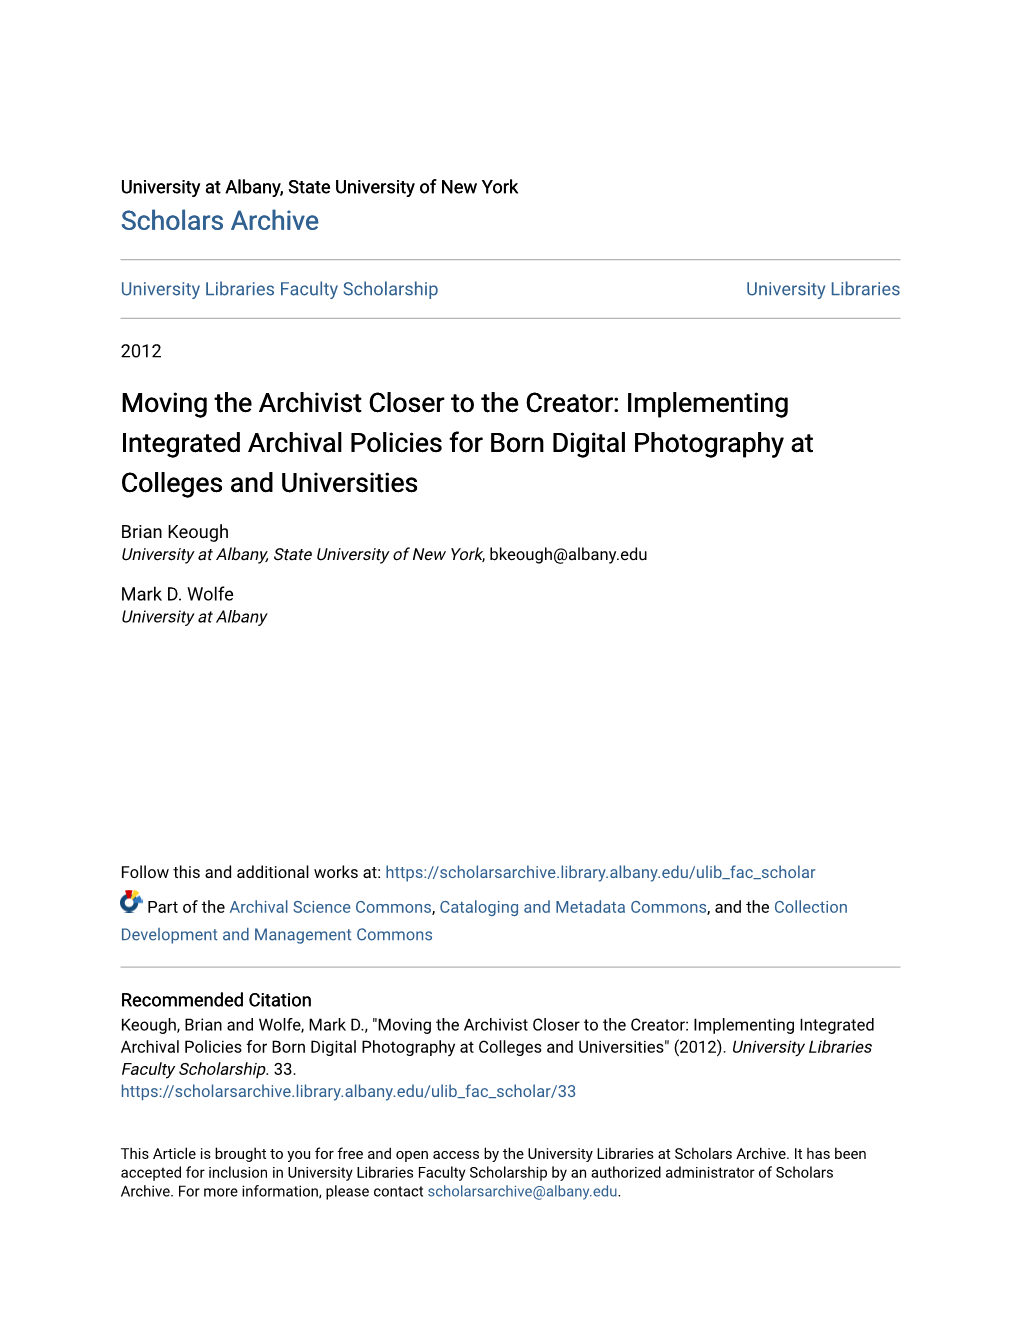 Implementing Integrated Archival Policies for Born Digital Photography at Colleges and Universities